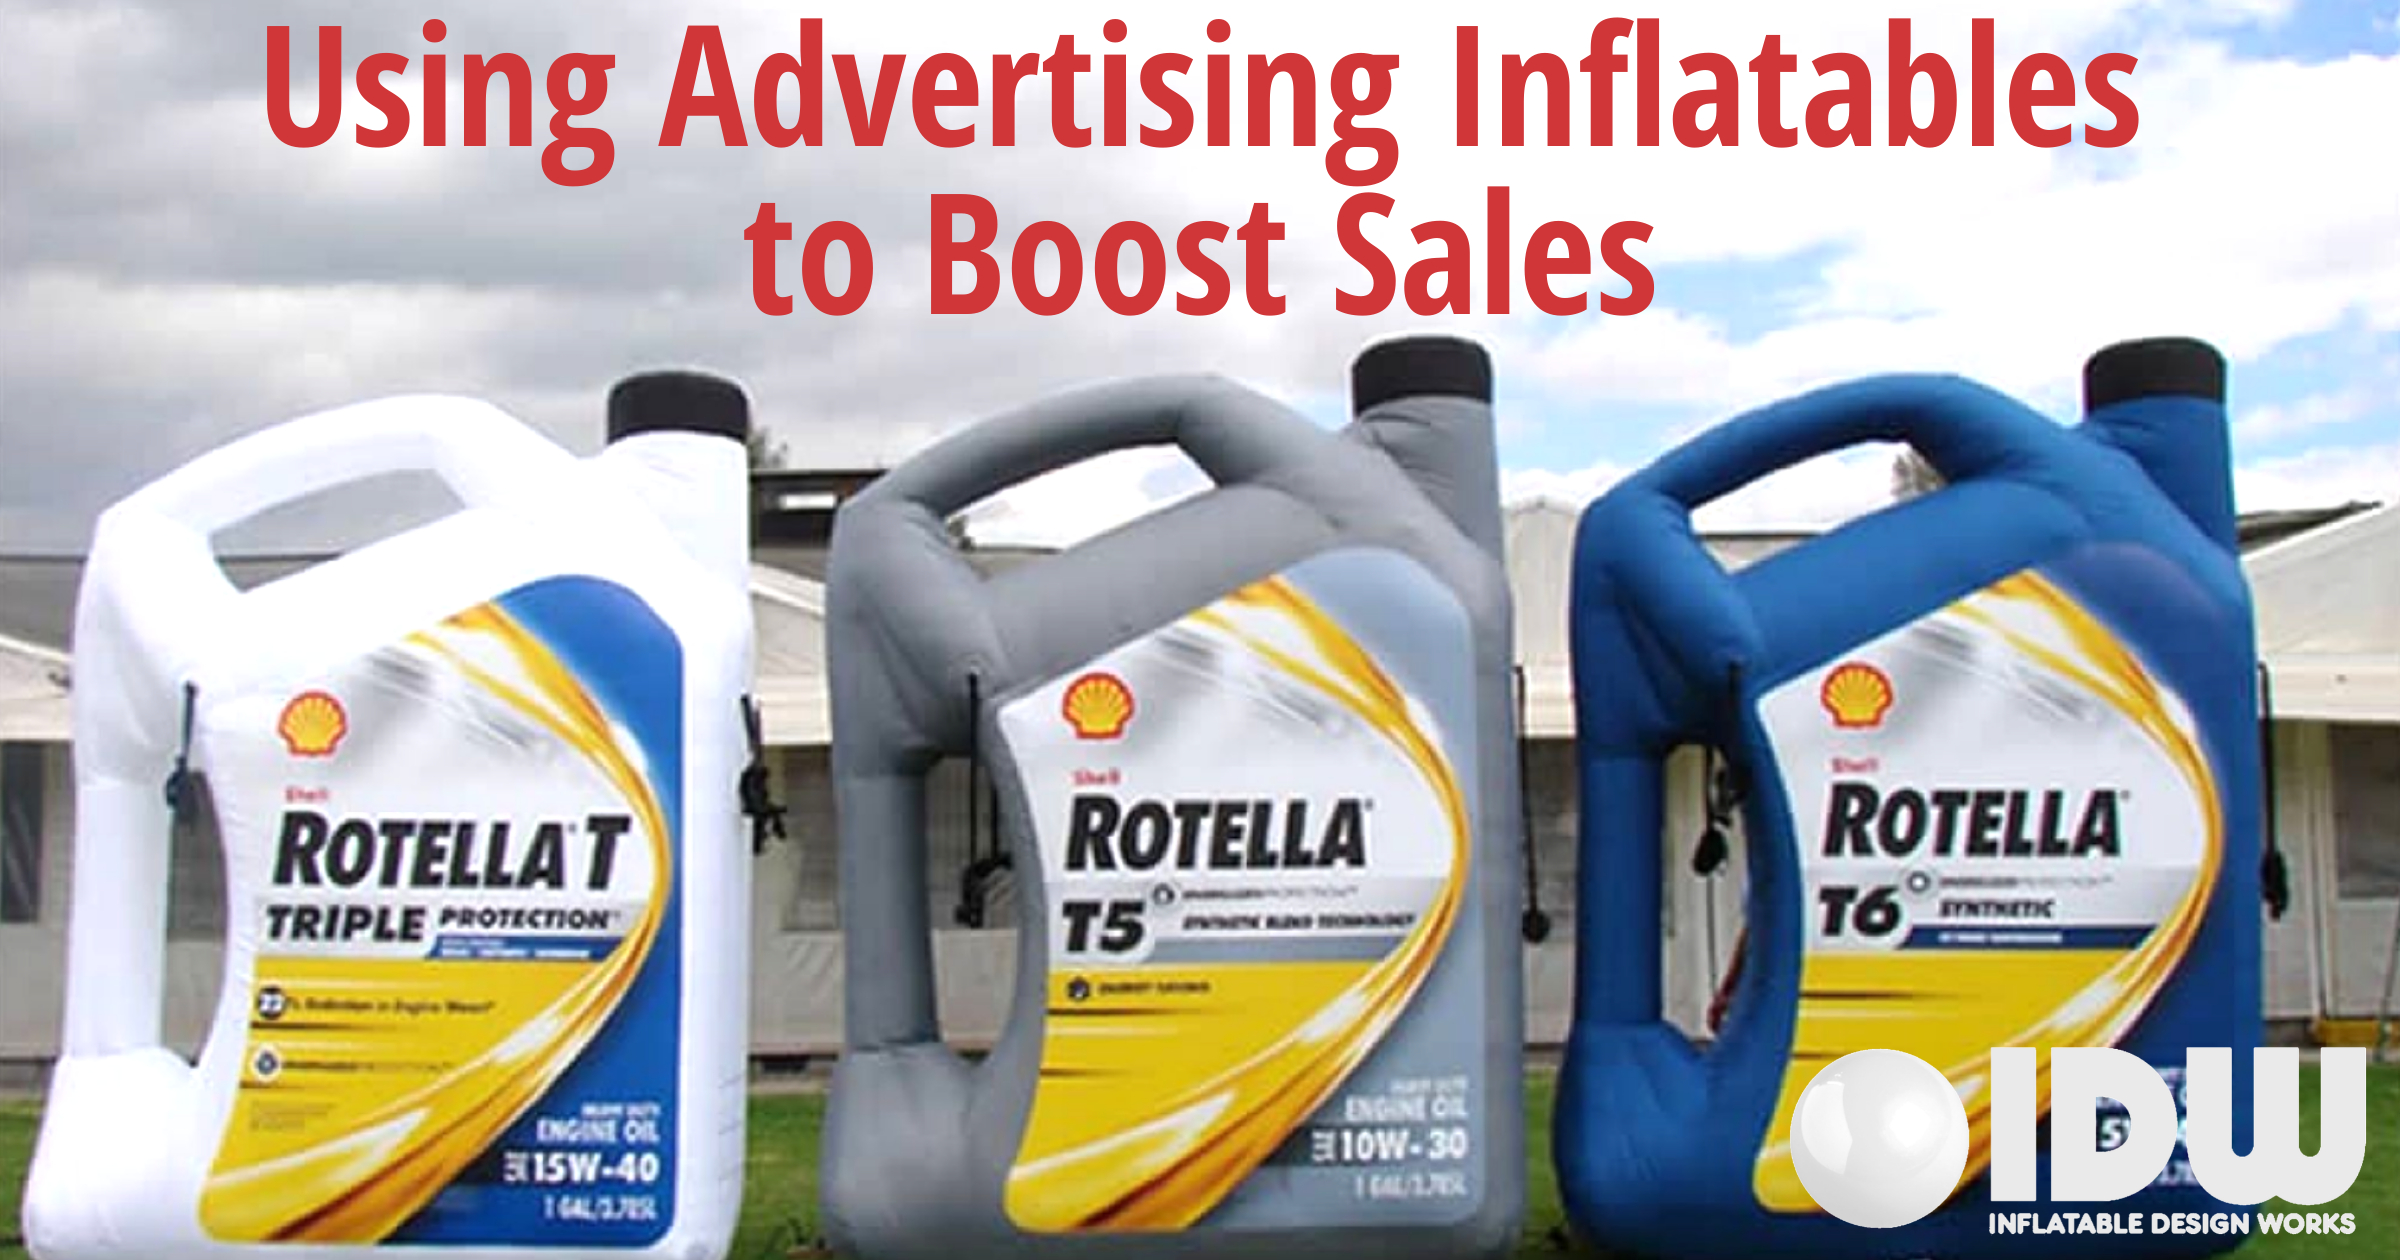 Using Advertising Inflatables to Boost Sales